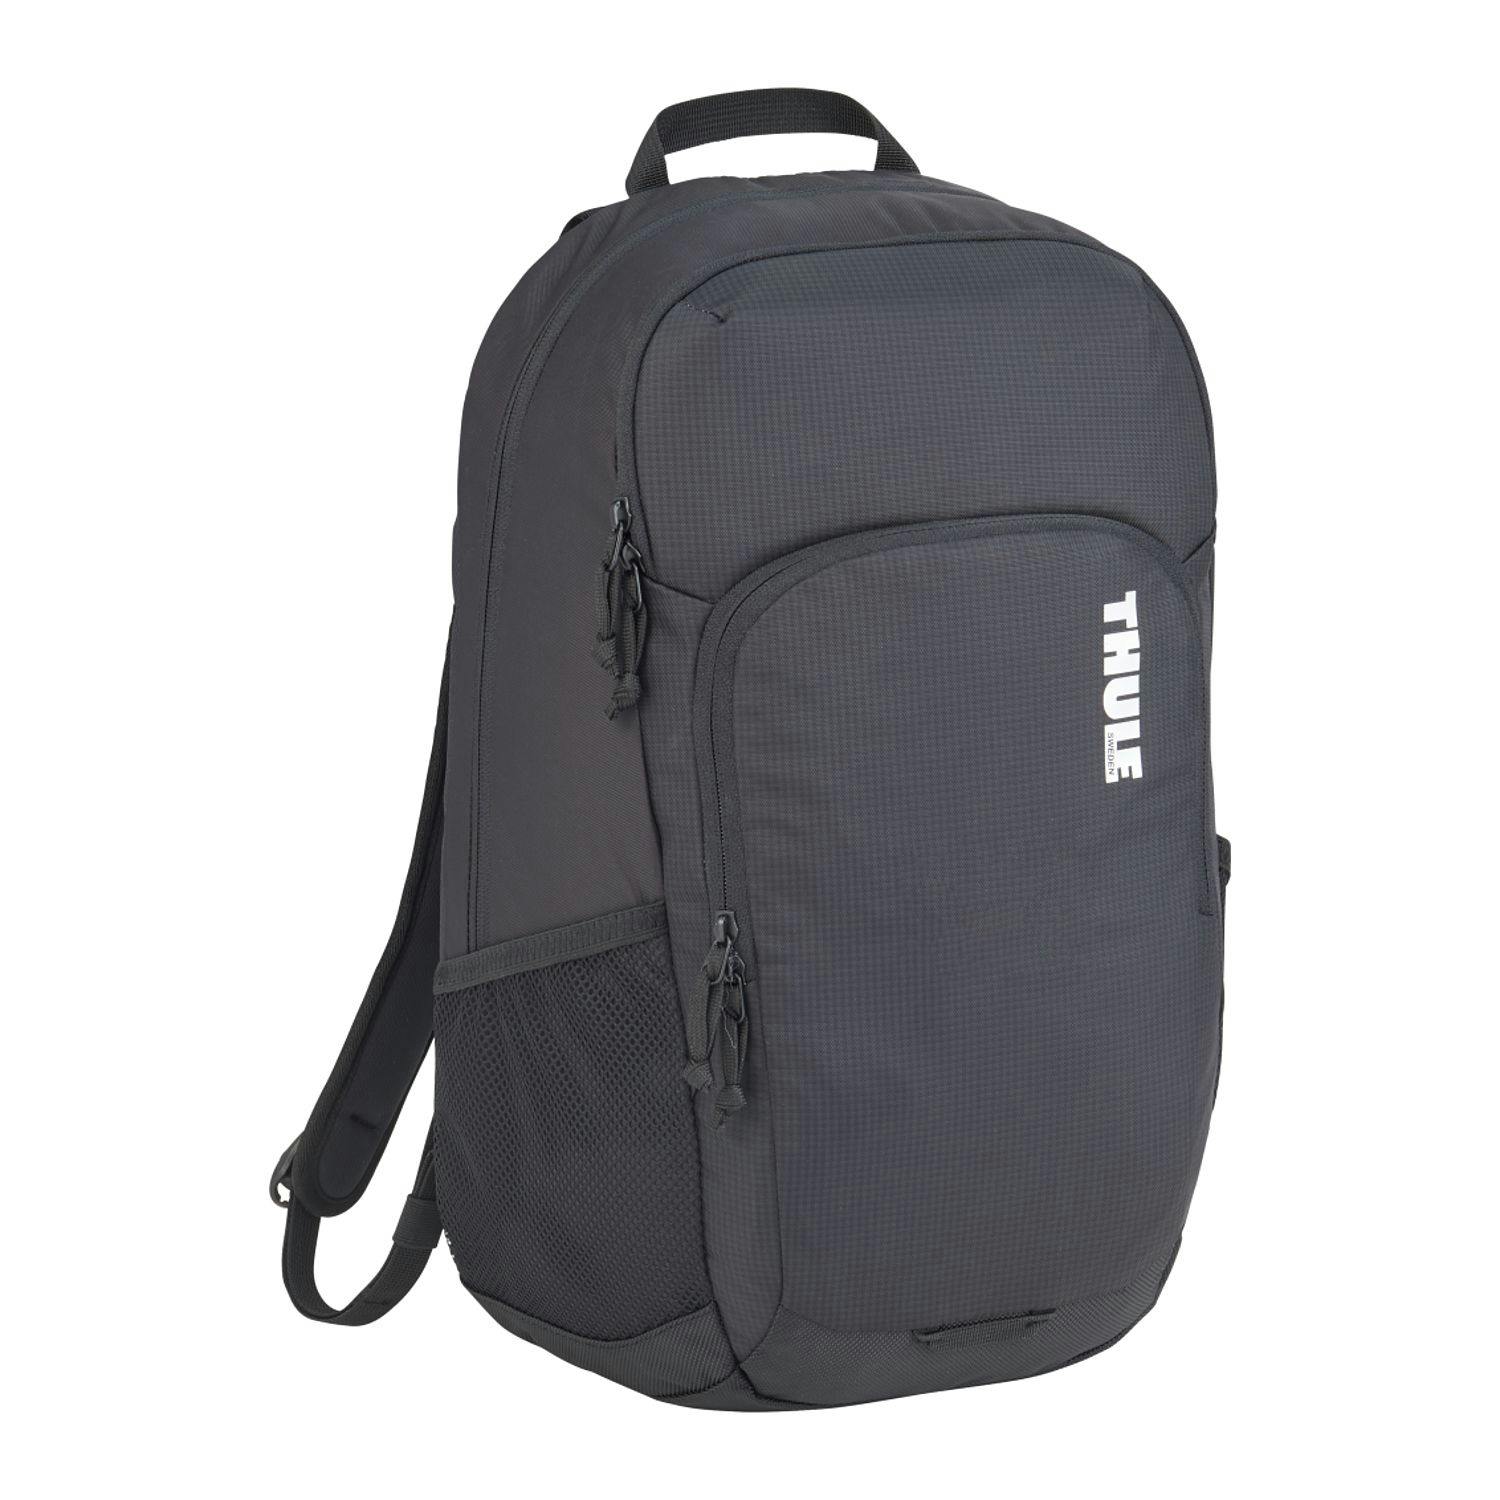 Thule Achiever 15" Computer Backpack - additional Image 1